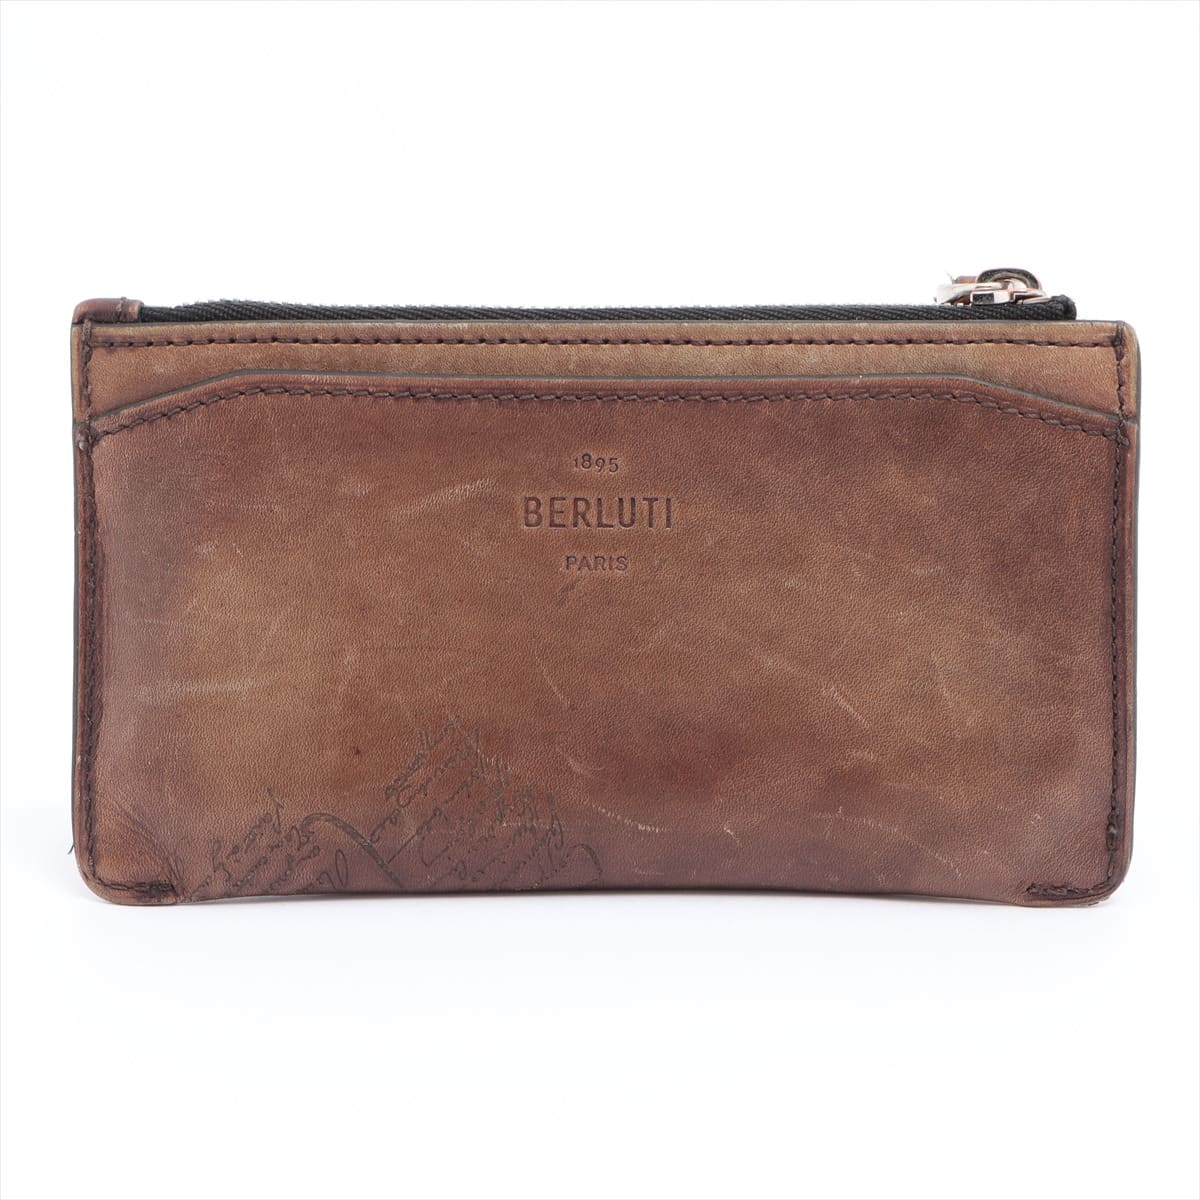 Berluti Calligraphy Leather Coin case Brown